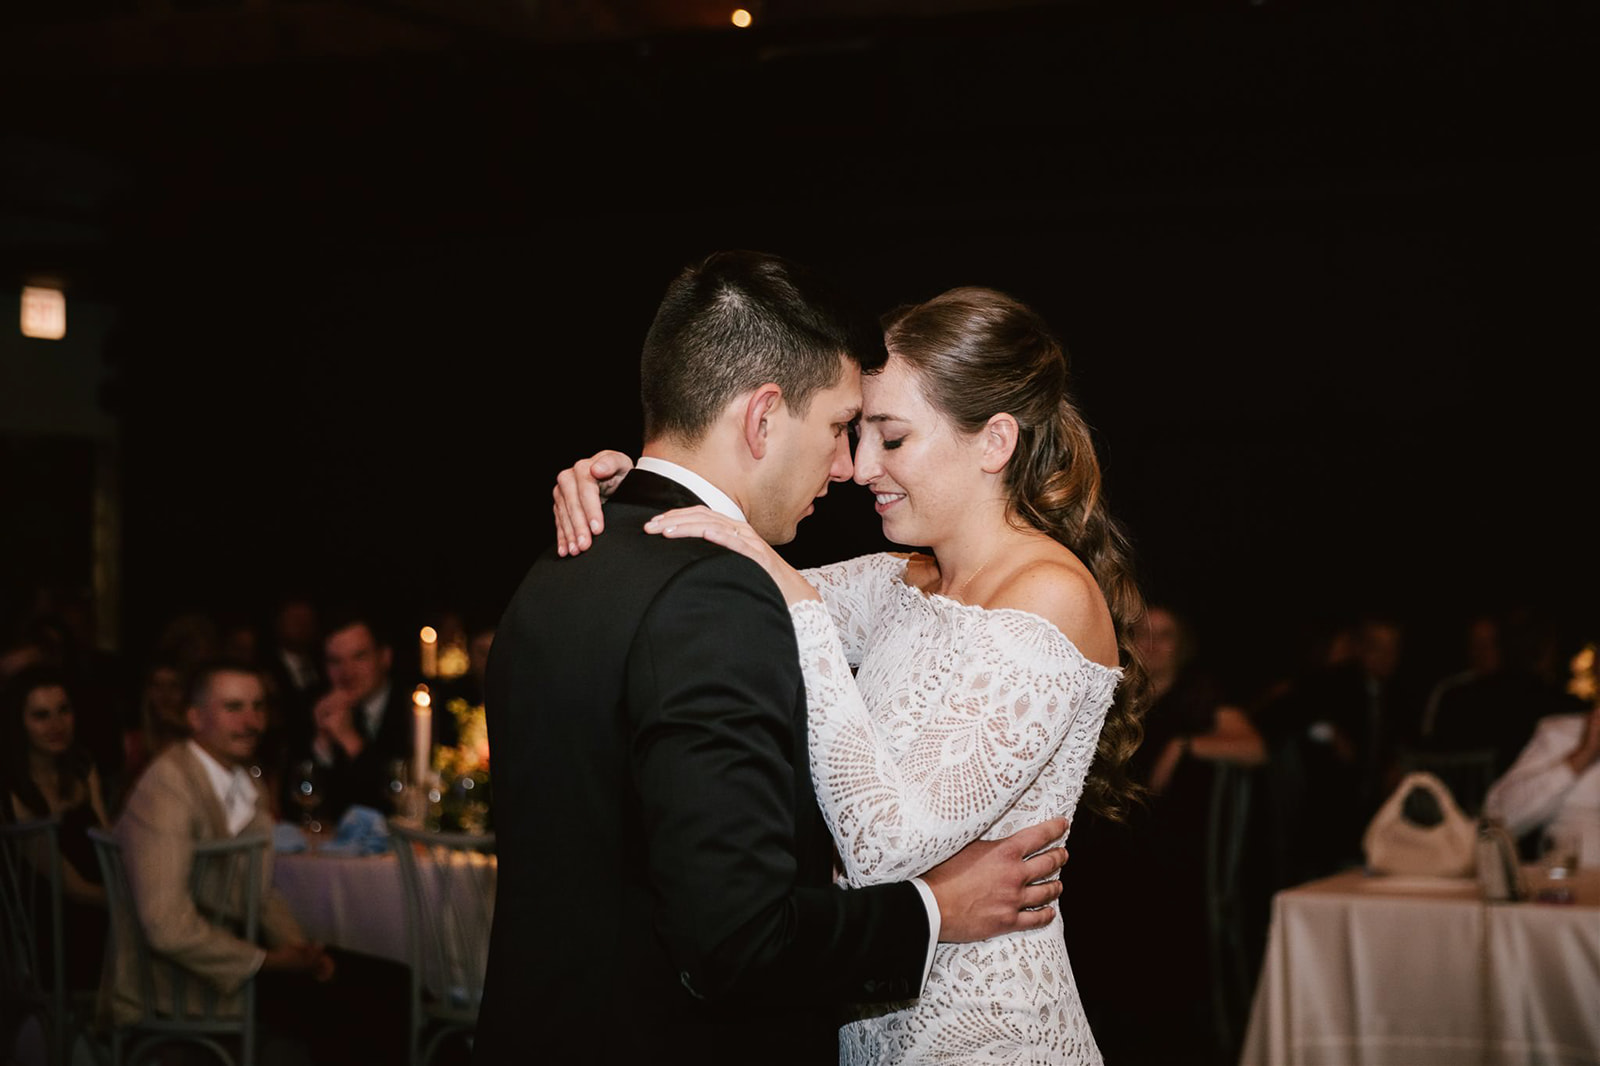 Bride and groom's magical first dance at Walden Chicago, radiating love and joy.